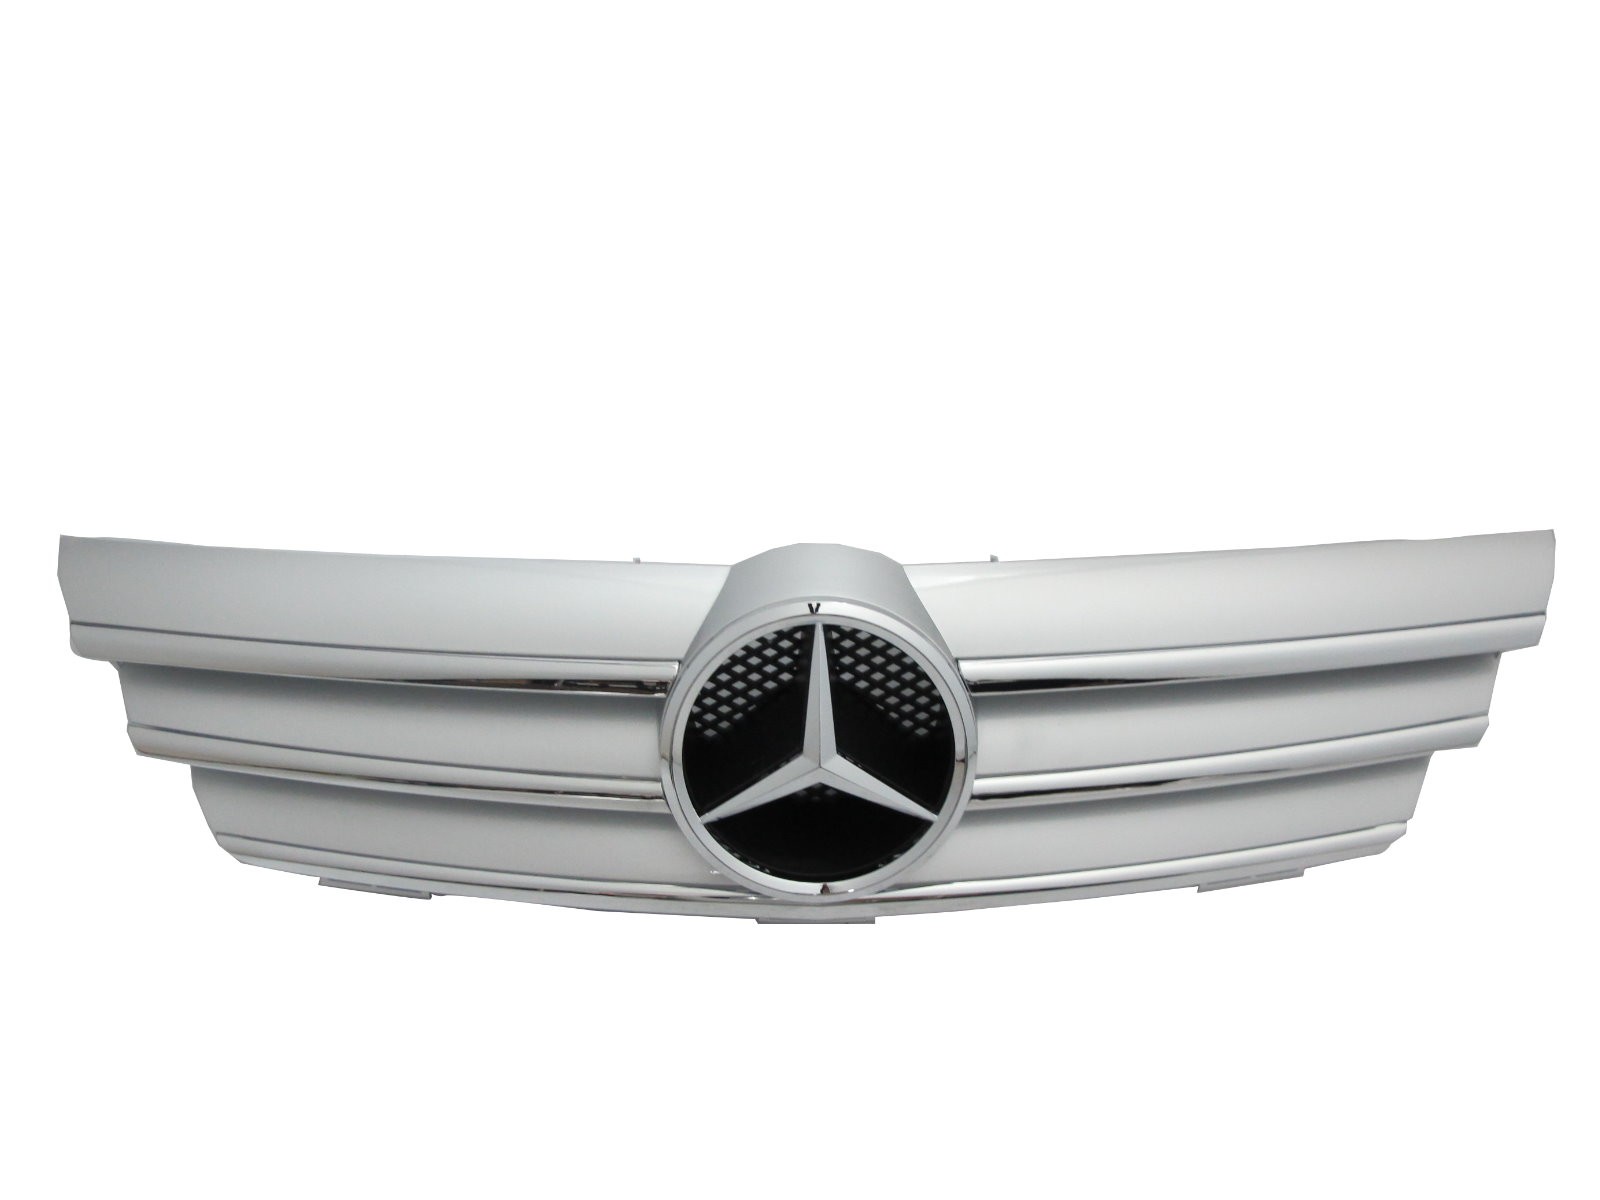 CrazyTheGod W203 2004-2007 COUPE GRILLE/GRILL 3FIN CHROME/SILVER for Mercedes-Benz